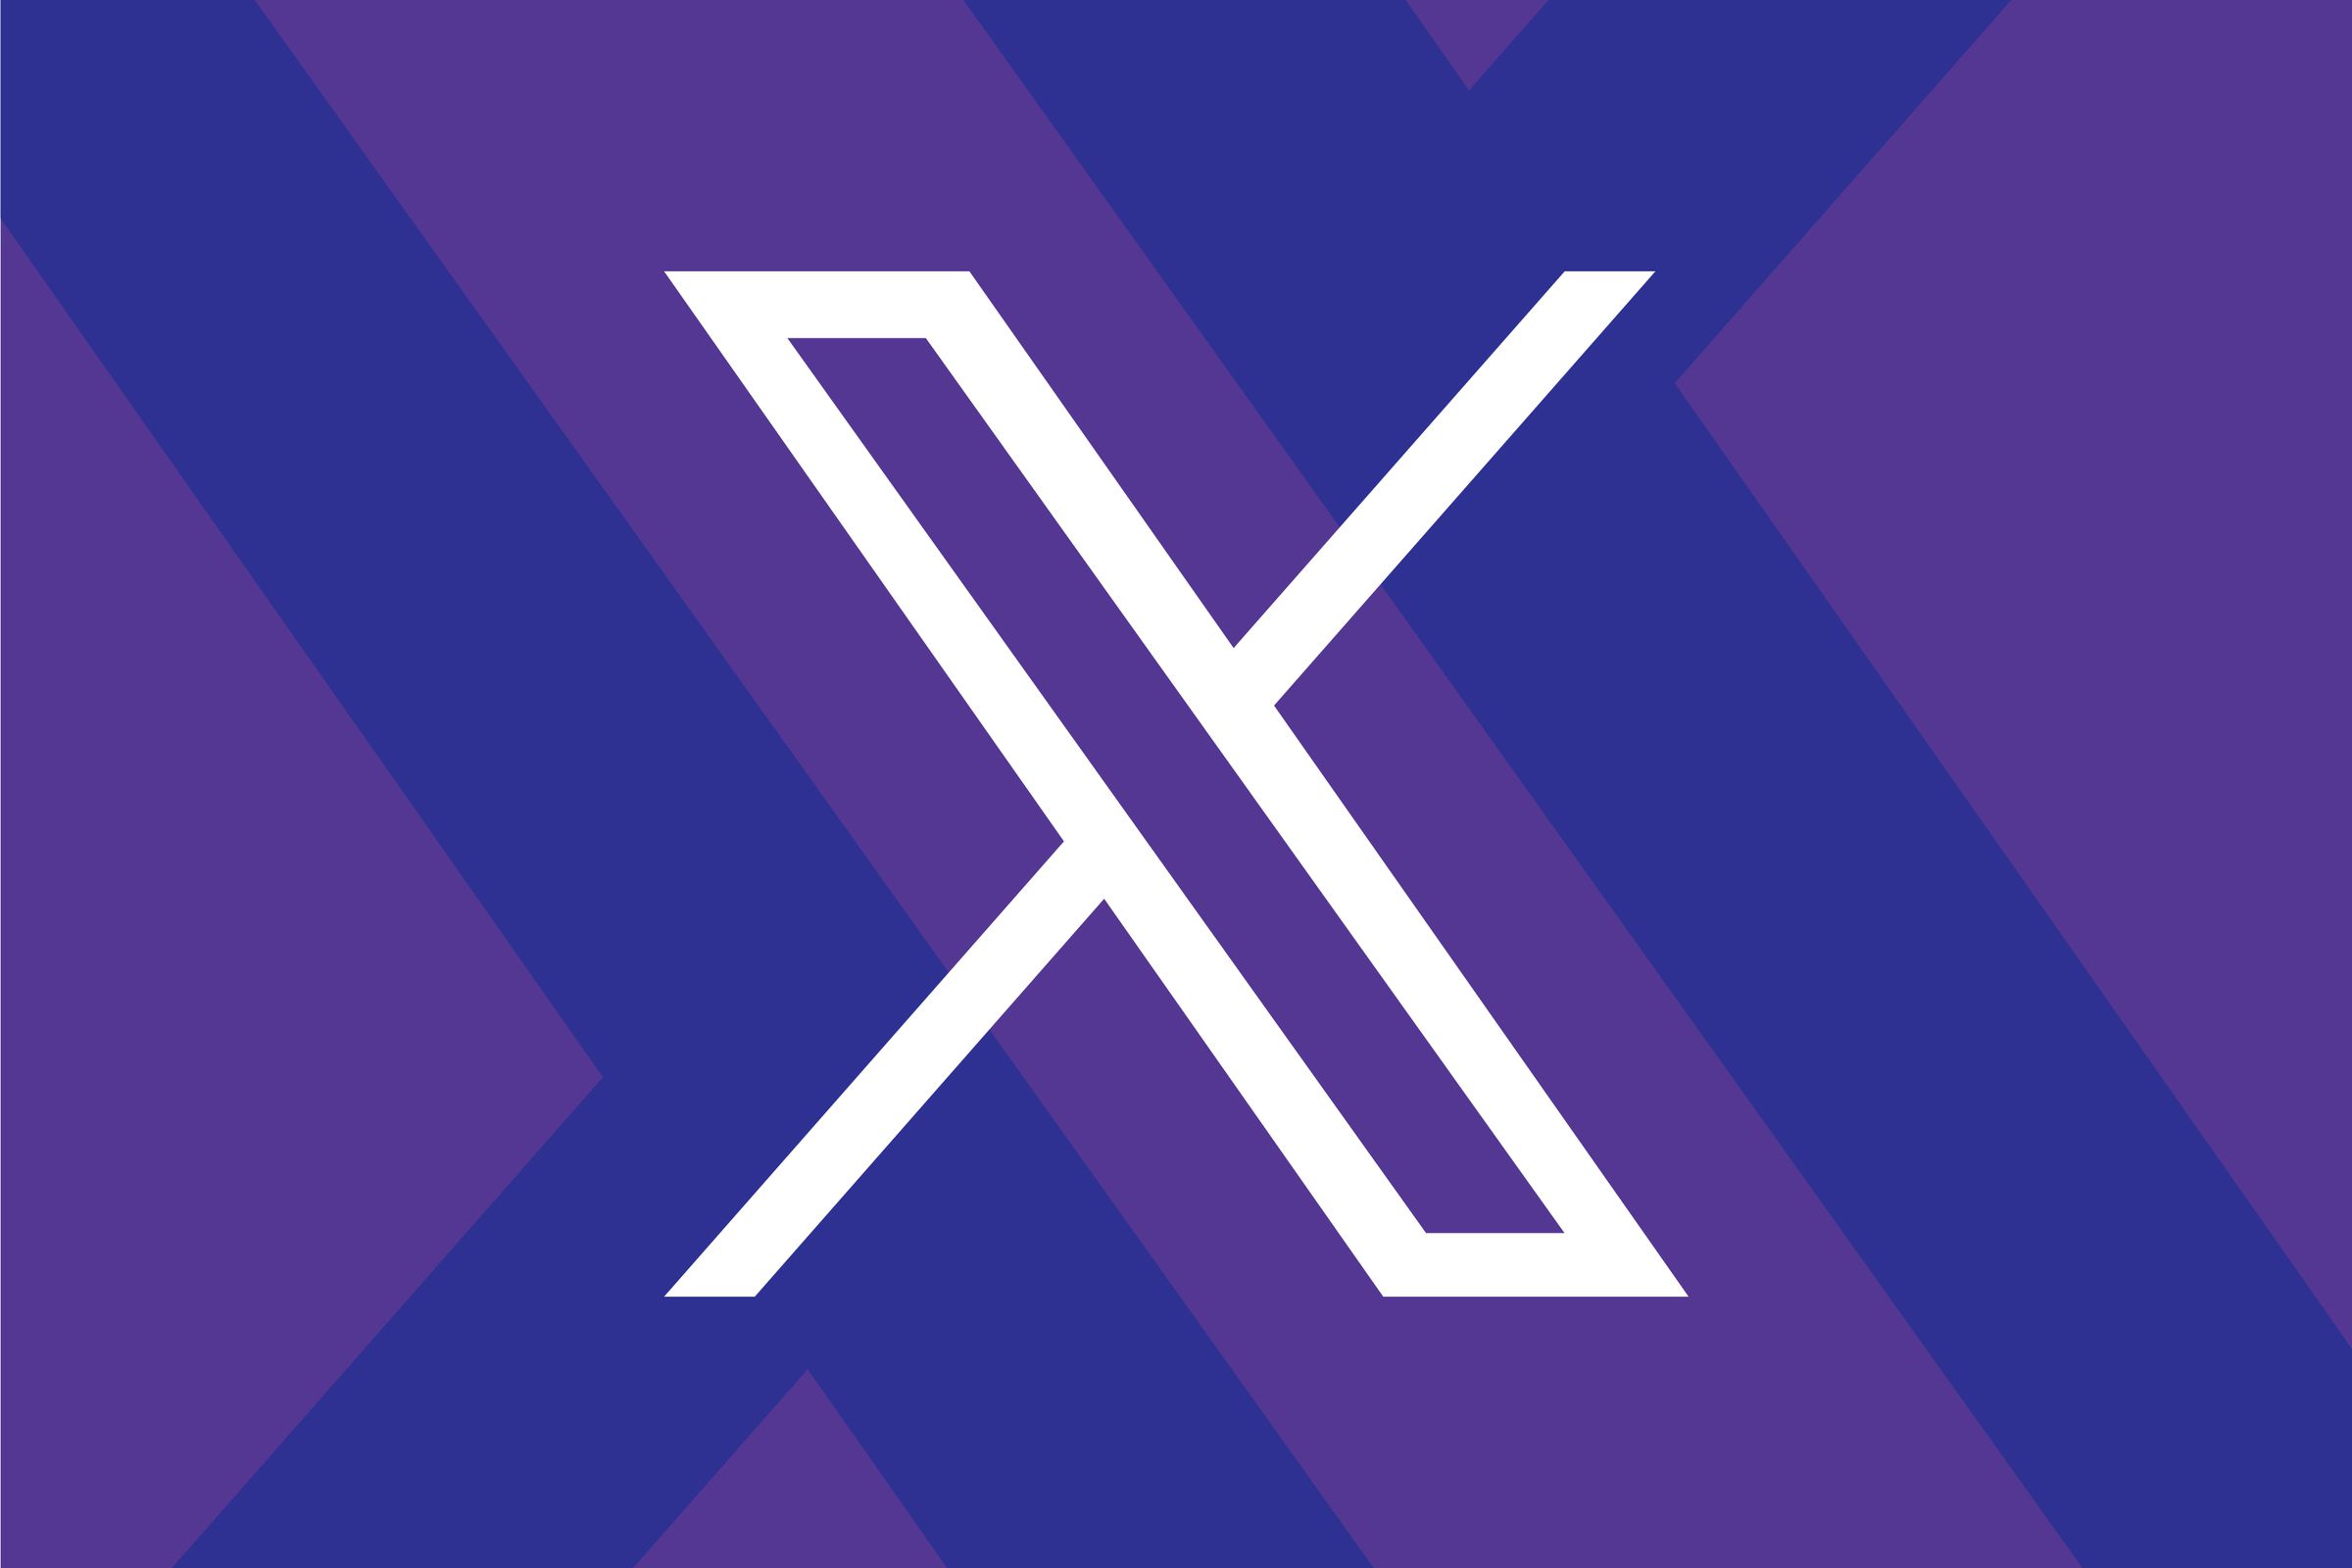 Twitter’s “X” logo on a purple and blue background